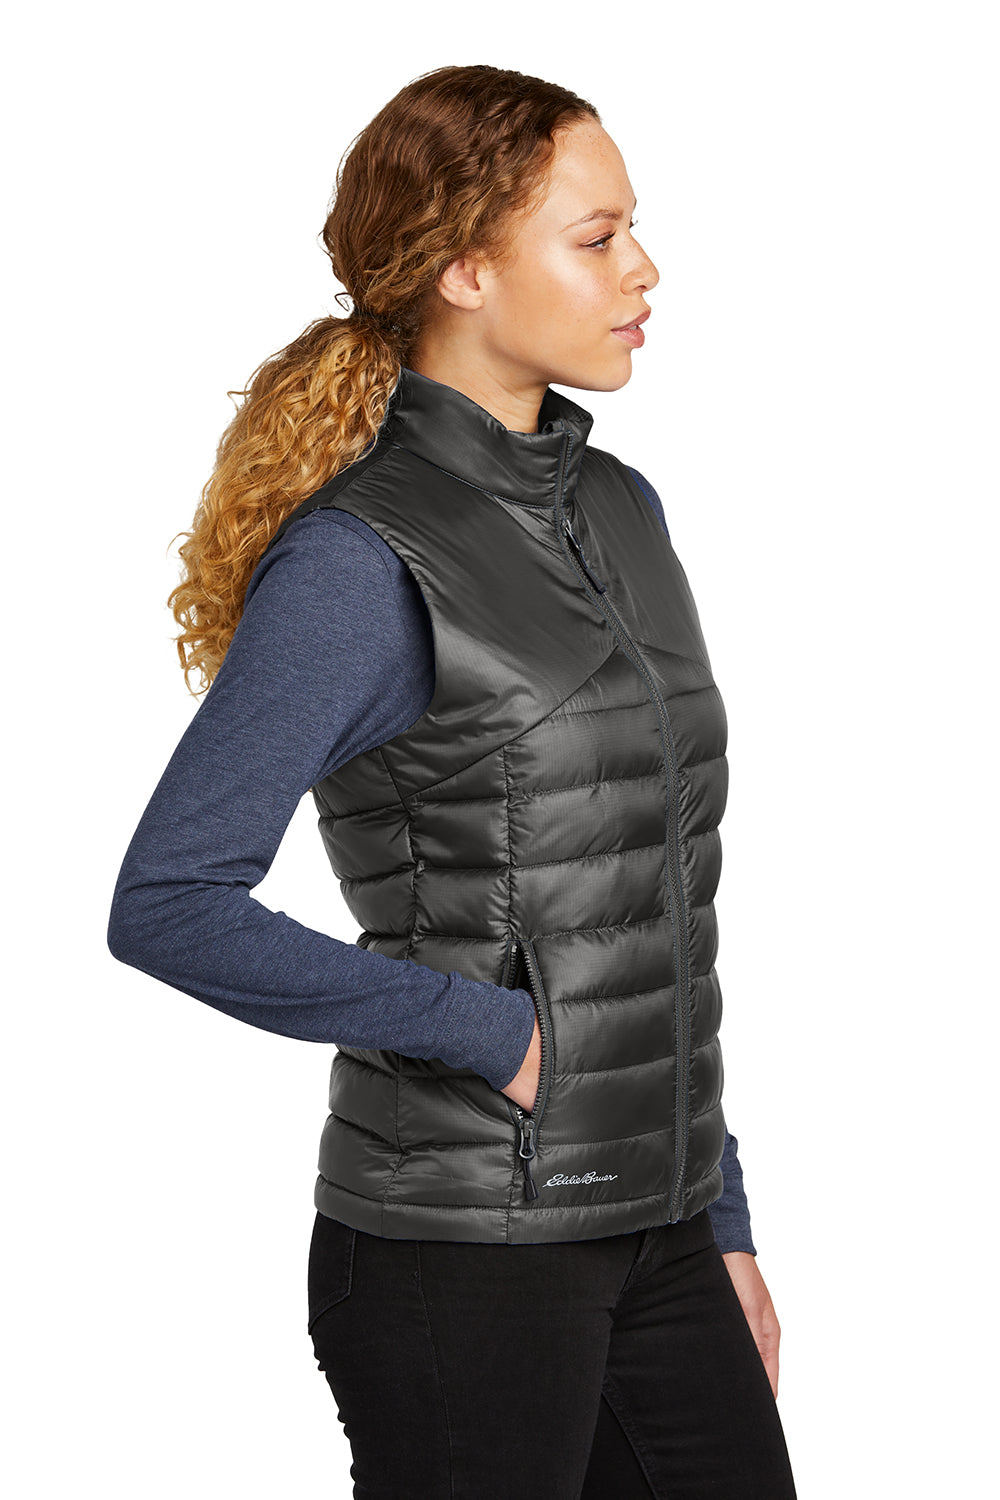 Eddie Bauer EB513 Womens Water Resistant Quilted Full Zip Vest Iron Gate Grey Model Side